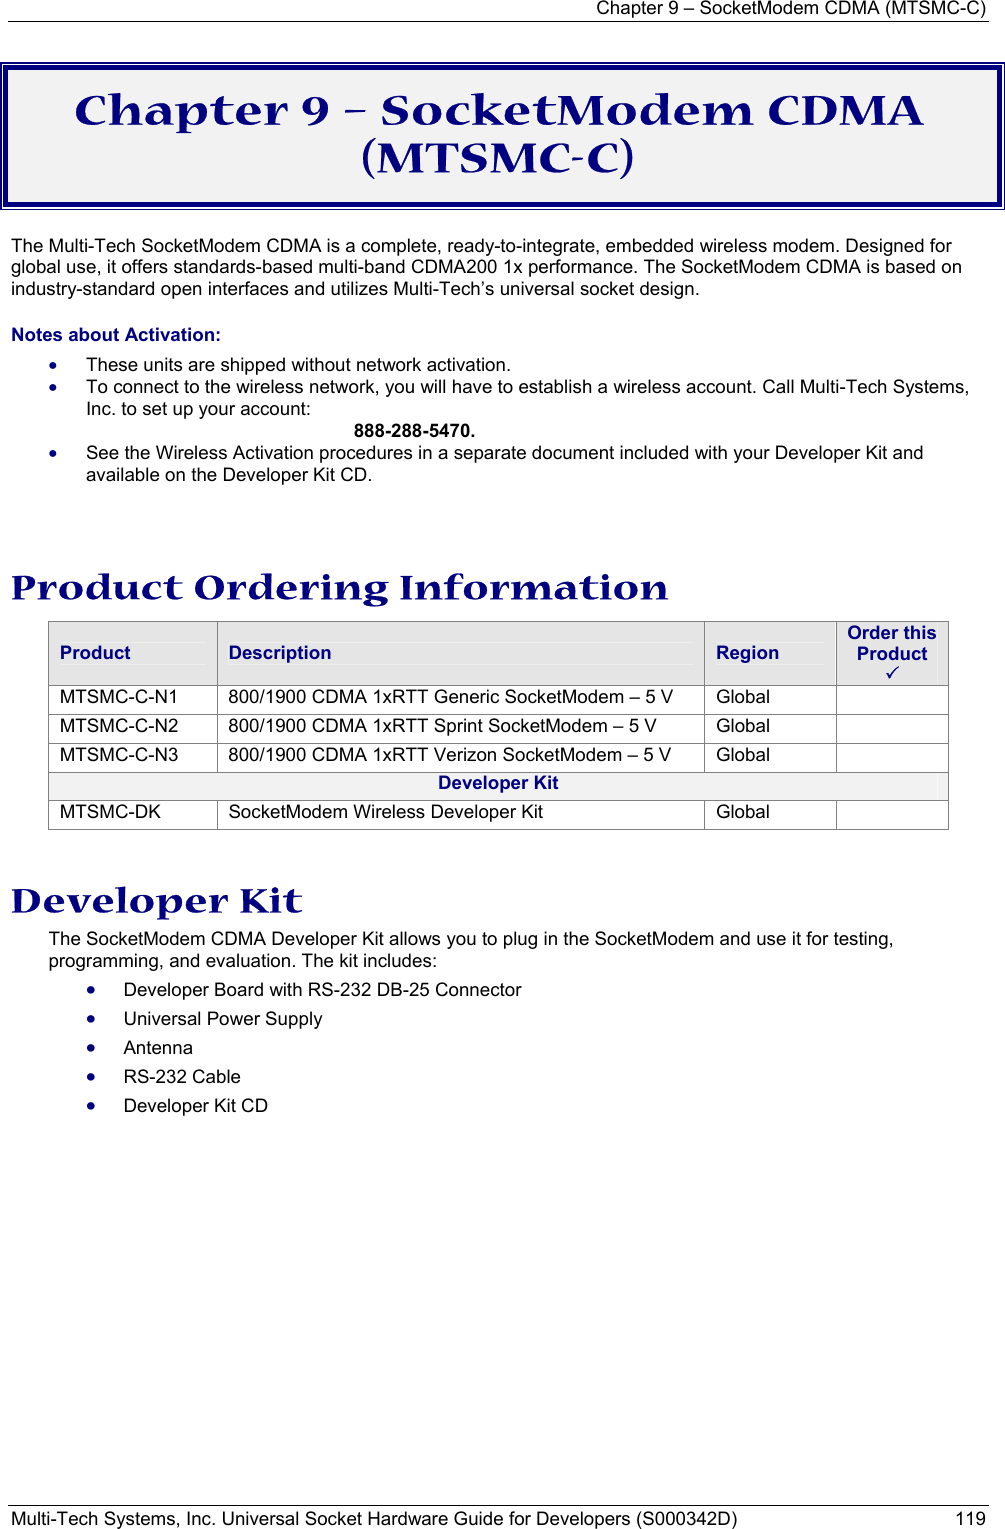 Chapter 9 – SocketModem CDMA (MTSMC-C) Multi-Tech Systems, Inc. Universal Socket Hardware Guide for Developers (S000342D)  119  Chapter 9 – SocketModem CDMA (MTSMC-C) The Multi-Tech SocketModem CDMA is a complete, ready-to-integrate, embedded wireless modem. Designed for global use, it offers standards-based multi-band CDMA200 1x performance. The SocketModem CDMA is based on industry-standard open interfaces and utilizes Multi-Tech’s universal socket design. Notes about Activation:  • These units are shipped without network activation.  • To connect to the wireless network, you will have to establish a wireless account. Call Multi-Tech Systems, Inc. to set up your account:   888-288-5470. • See the Wireless Activation procedures in a separate document included with your Developer Kit and available on the Developer Kit CD.  Product Ordering Information Product  Description  Region Order this Product  3 MTSMC-C-N1  800/1900 CDMA 1xRTT Generic SocketModem – 5 V  Global   MTSMC-C-N2  800/1900 CDMA 1xRTT Sprint SocketModem – 5 V  Global   MTSMC-C-N3  800/1900 CDMA 1xRTT Verizon SocketModem – 5 V  Global   Developer Kit MTSMC-DK  SocketModem Wireless Developer Kit  Global    Developer Kit The SocketModem CDMA Developer Kit allows you to plug in the SocketModem and use it for testing, programming, and evaluation. The kit includes: • Developer Board with RS-232 DB-25 Connector  • Universal Power Supply • Antenna  • RS-232 Cable • Developer Kit CD 